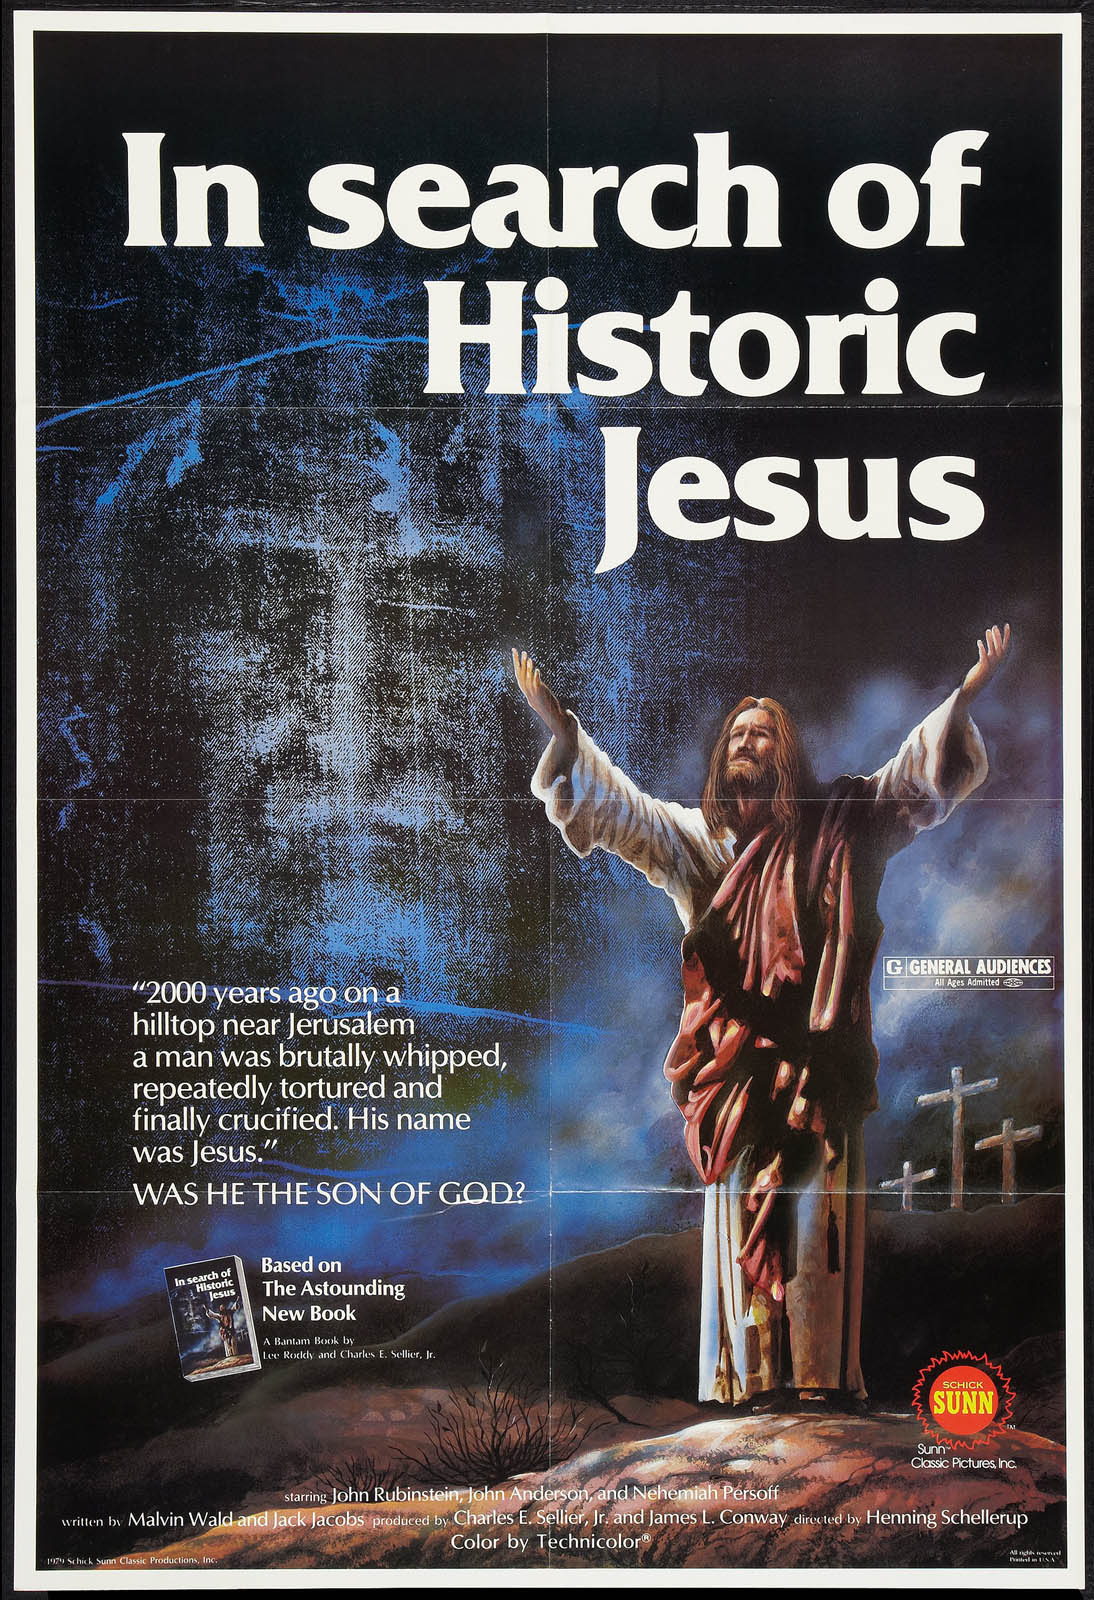 IN SEARCH OF HISTORIC JESUS